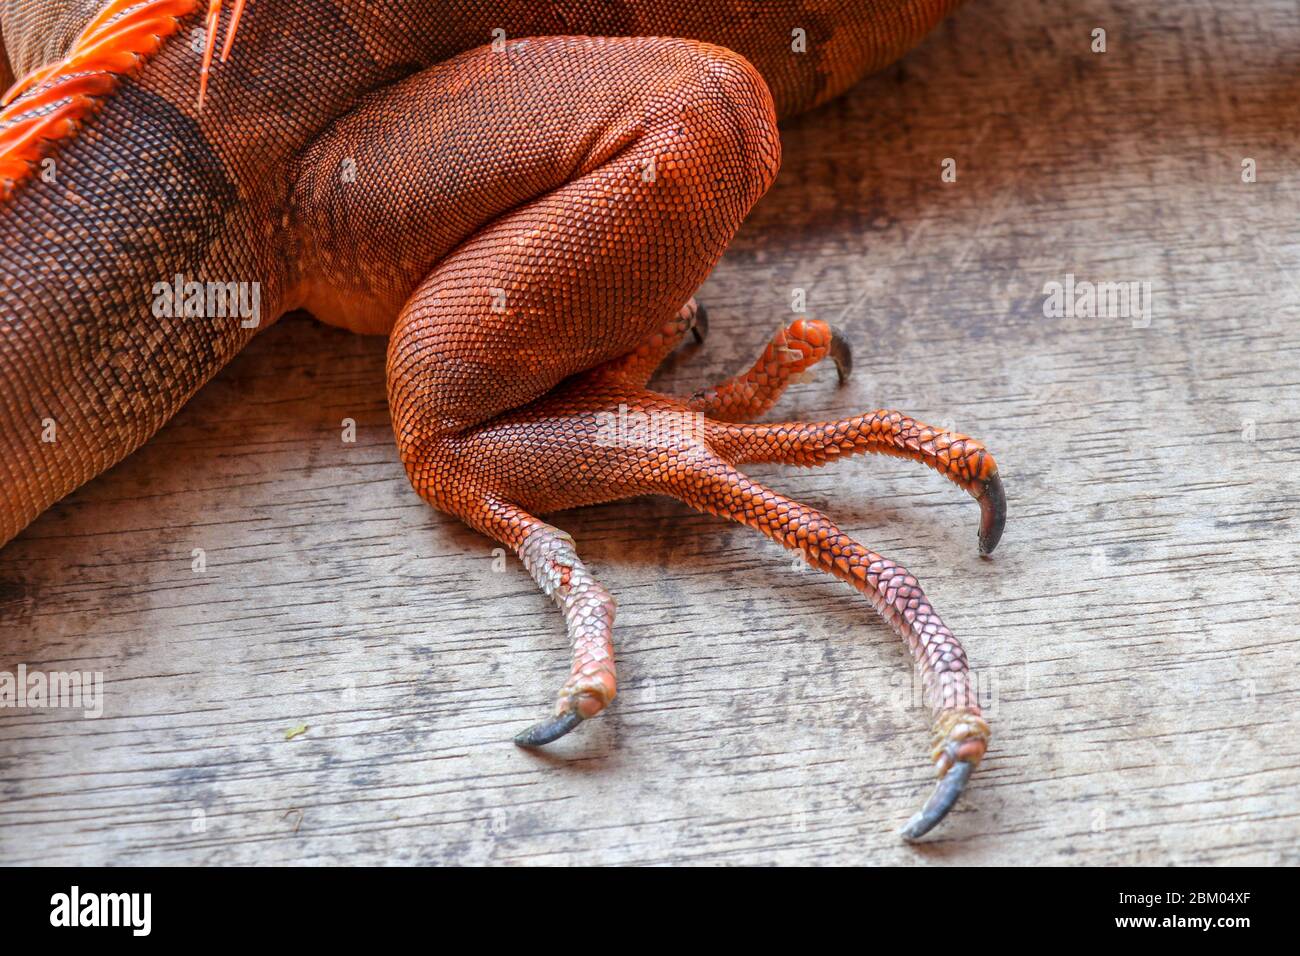 Close up on hind leg with long sharp claws of tropical reptile Red Iguana. Focus on leg with scaly skin. Skin in red, orange, yellow and blue tones. R Stock Photo